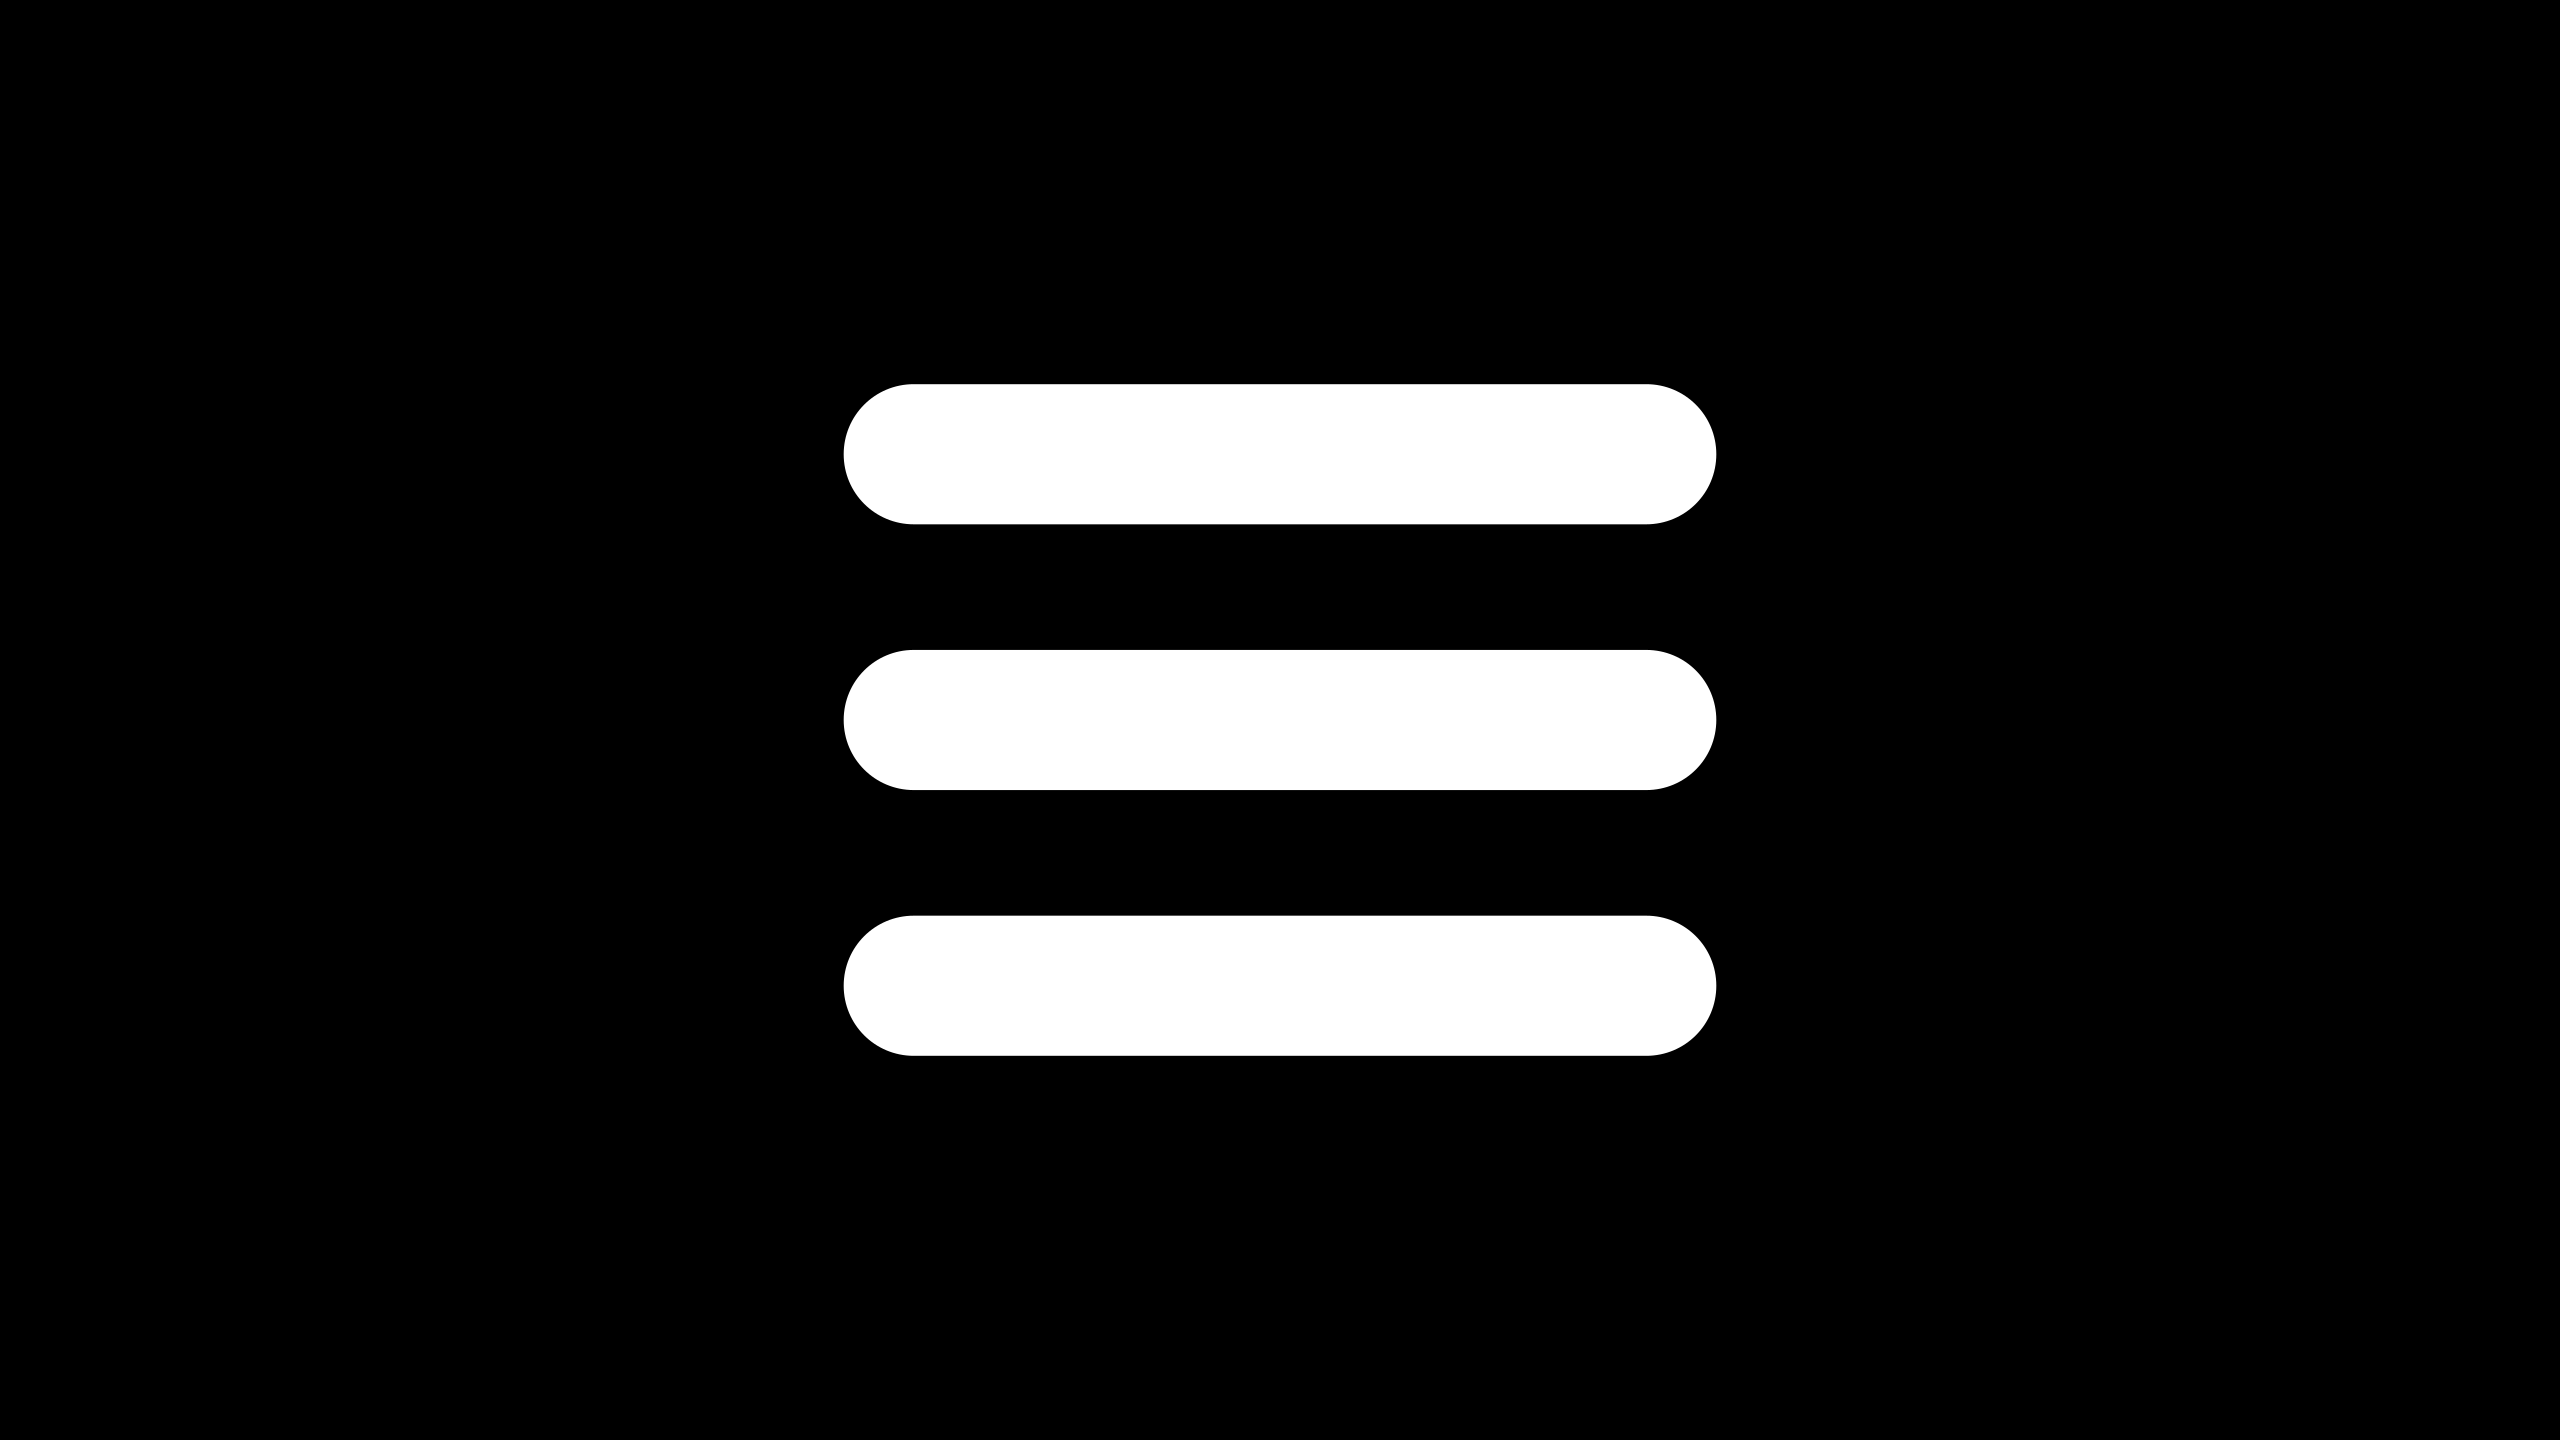 Creating an animated hamburger menu icon with CSS-only